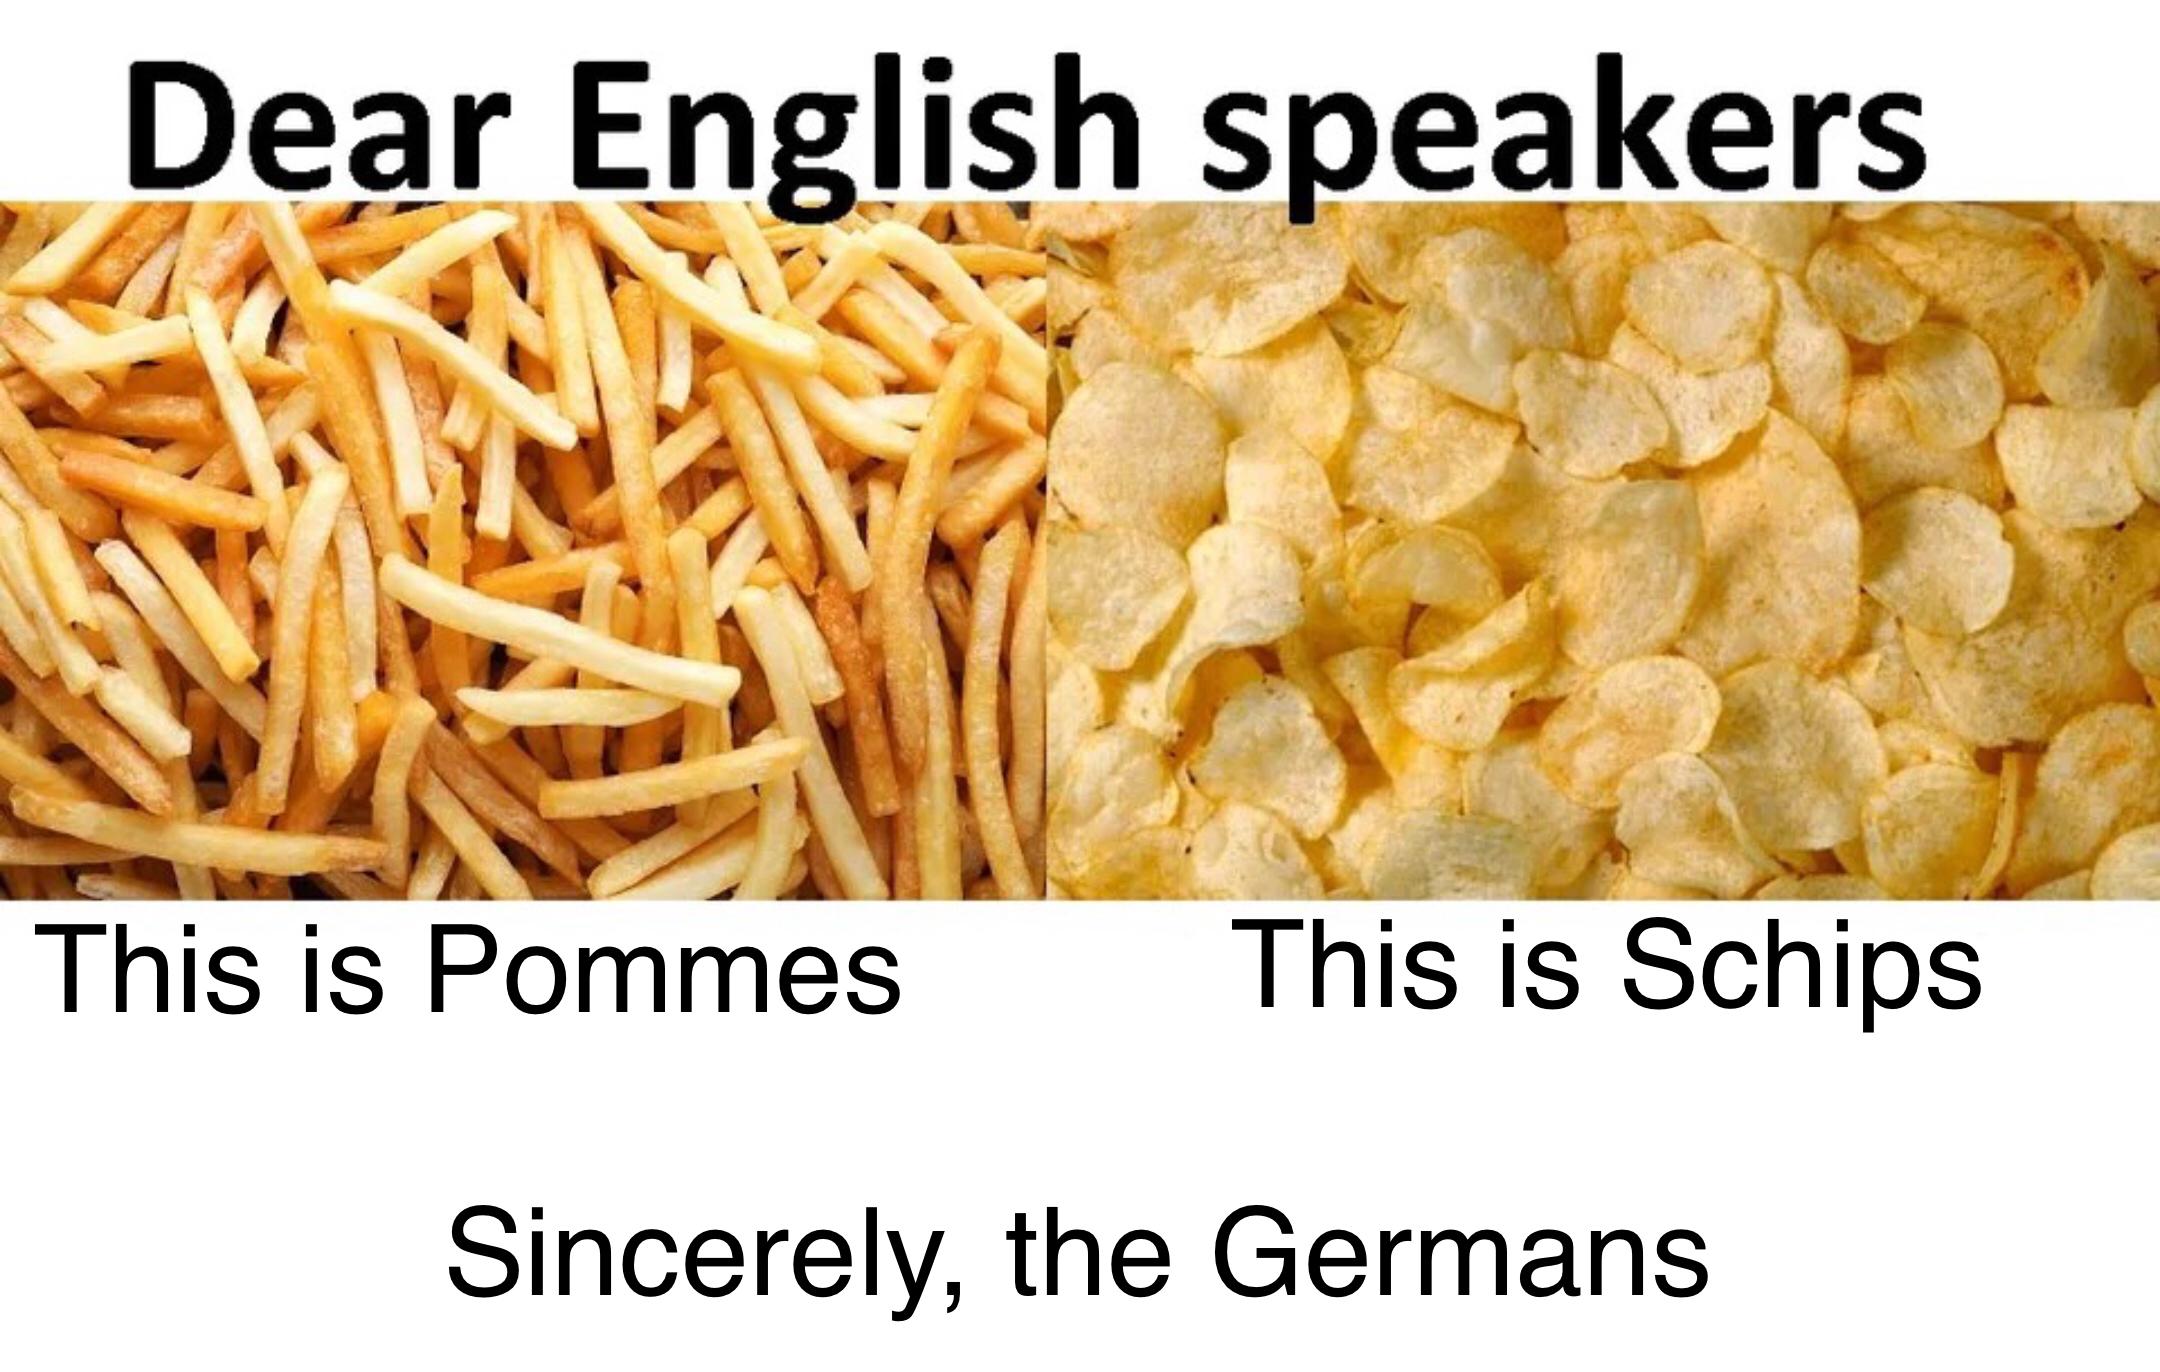 hilarious memes - french fries - Dear English speakers This is Pommes This is Schips Sincerely, the Germans